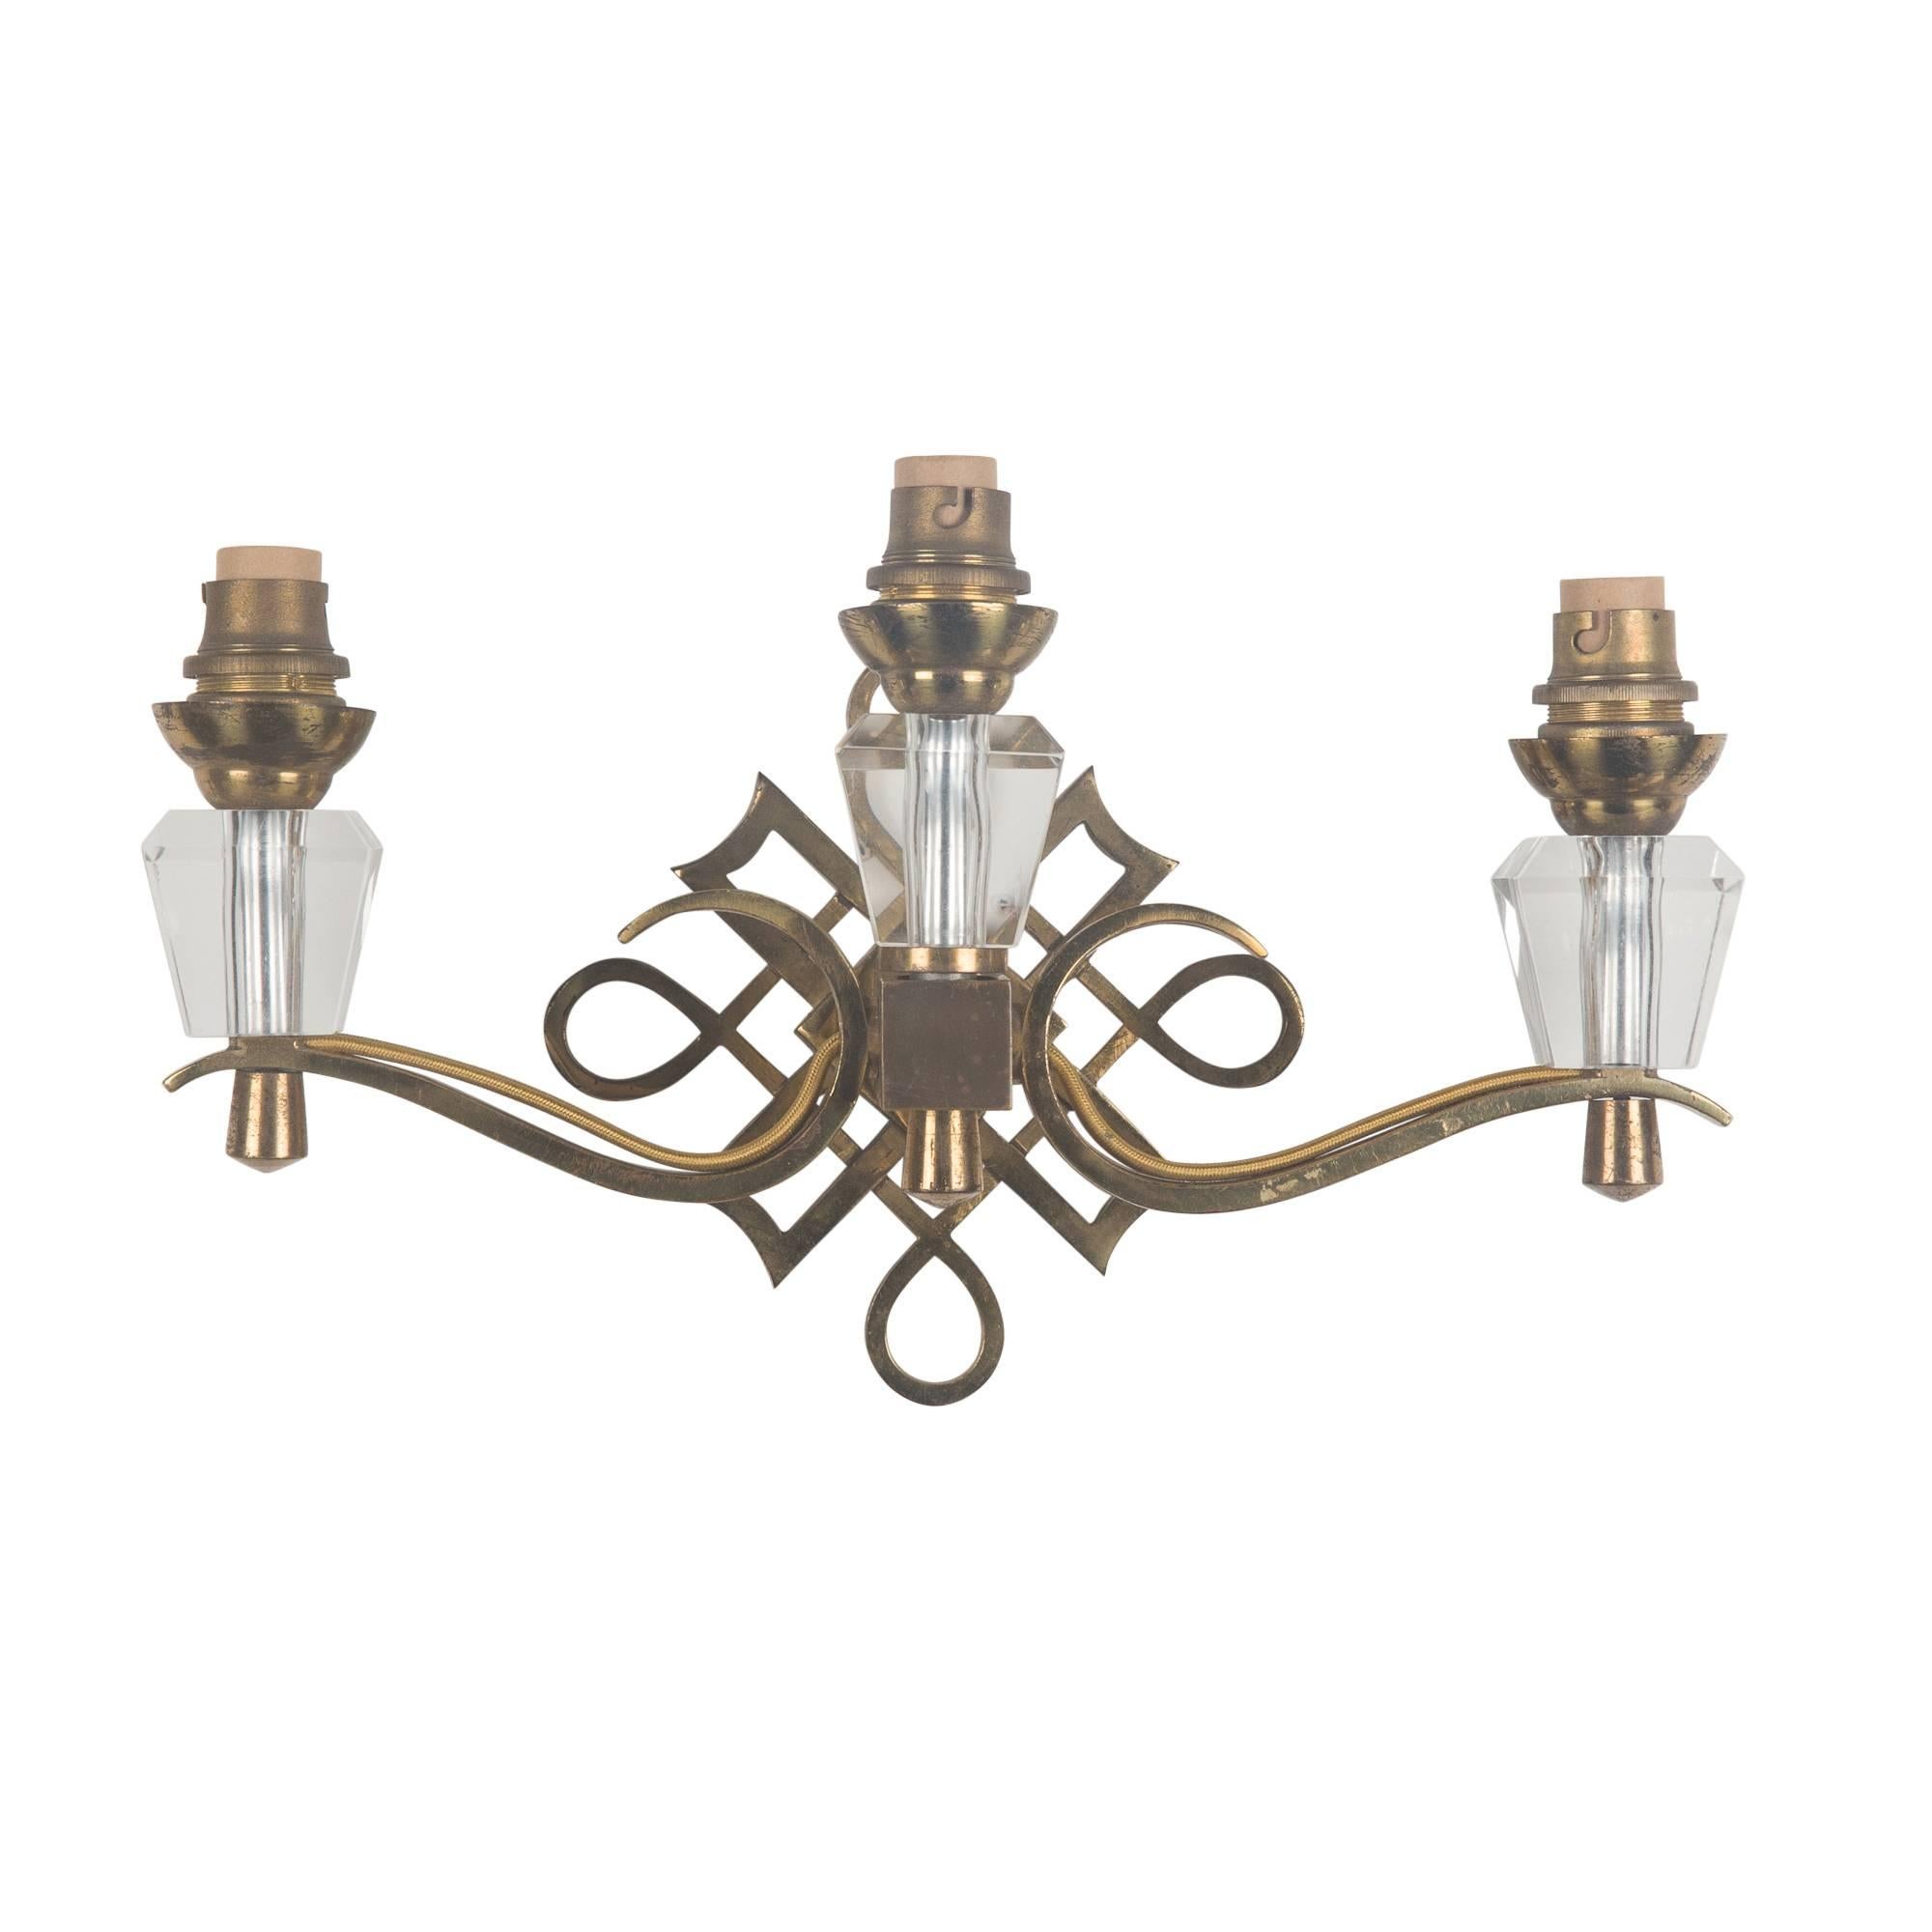 Pair of two arm, three light wall sconces, in bronze, with swirled decorative back element, faceted crystal socket undermounts, in the style of Jules Leleu, France, 1930s.Measures: Height to top of socket 6 in, width 12 1/2 in, depth 4 in.